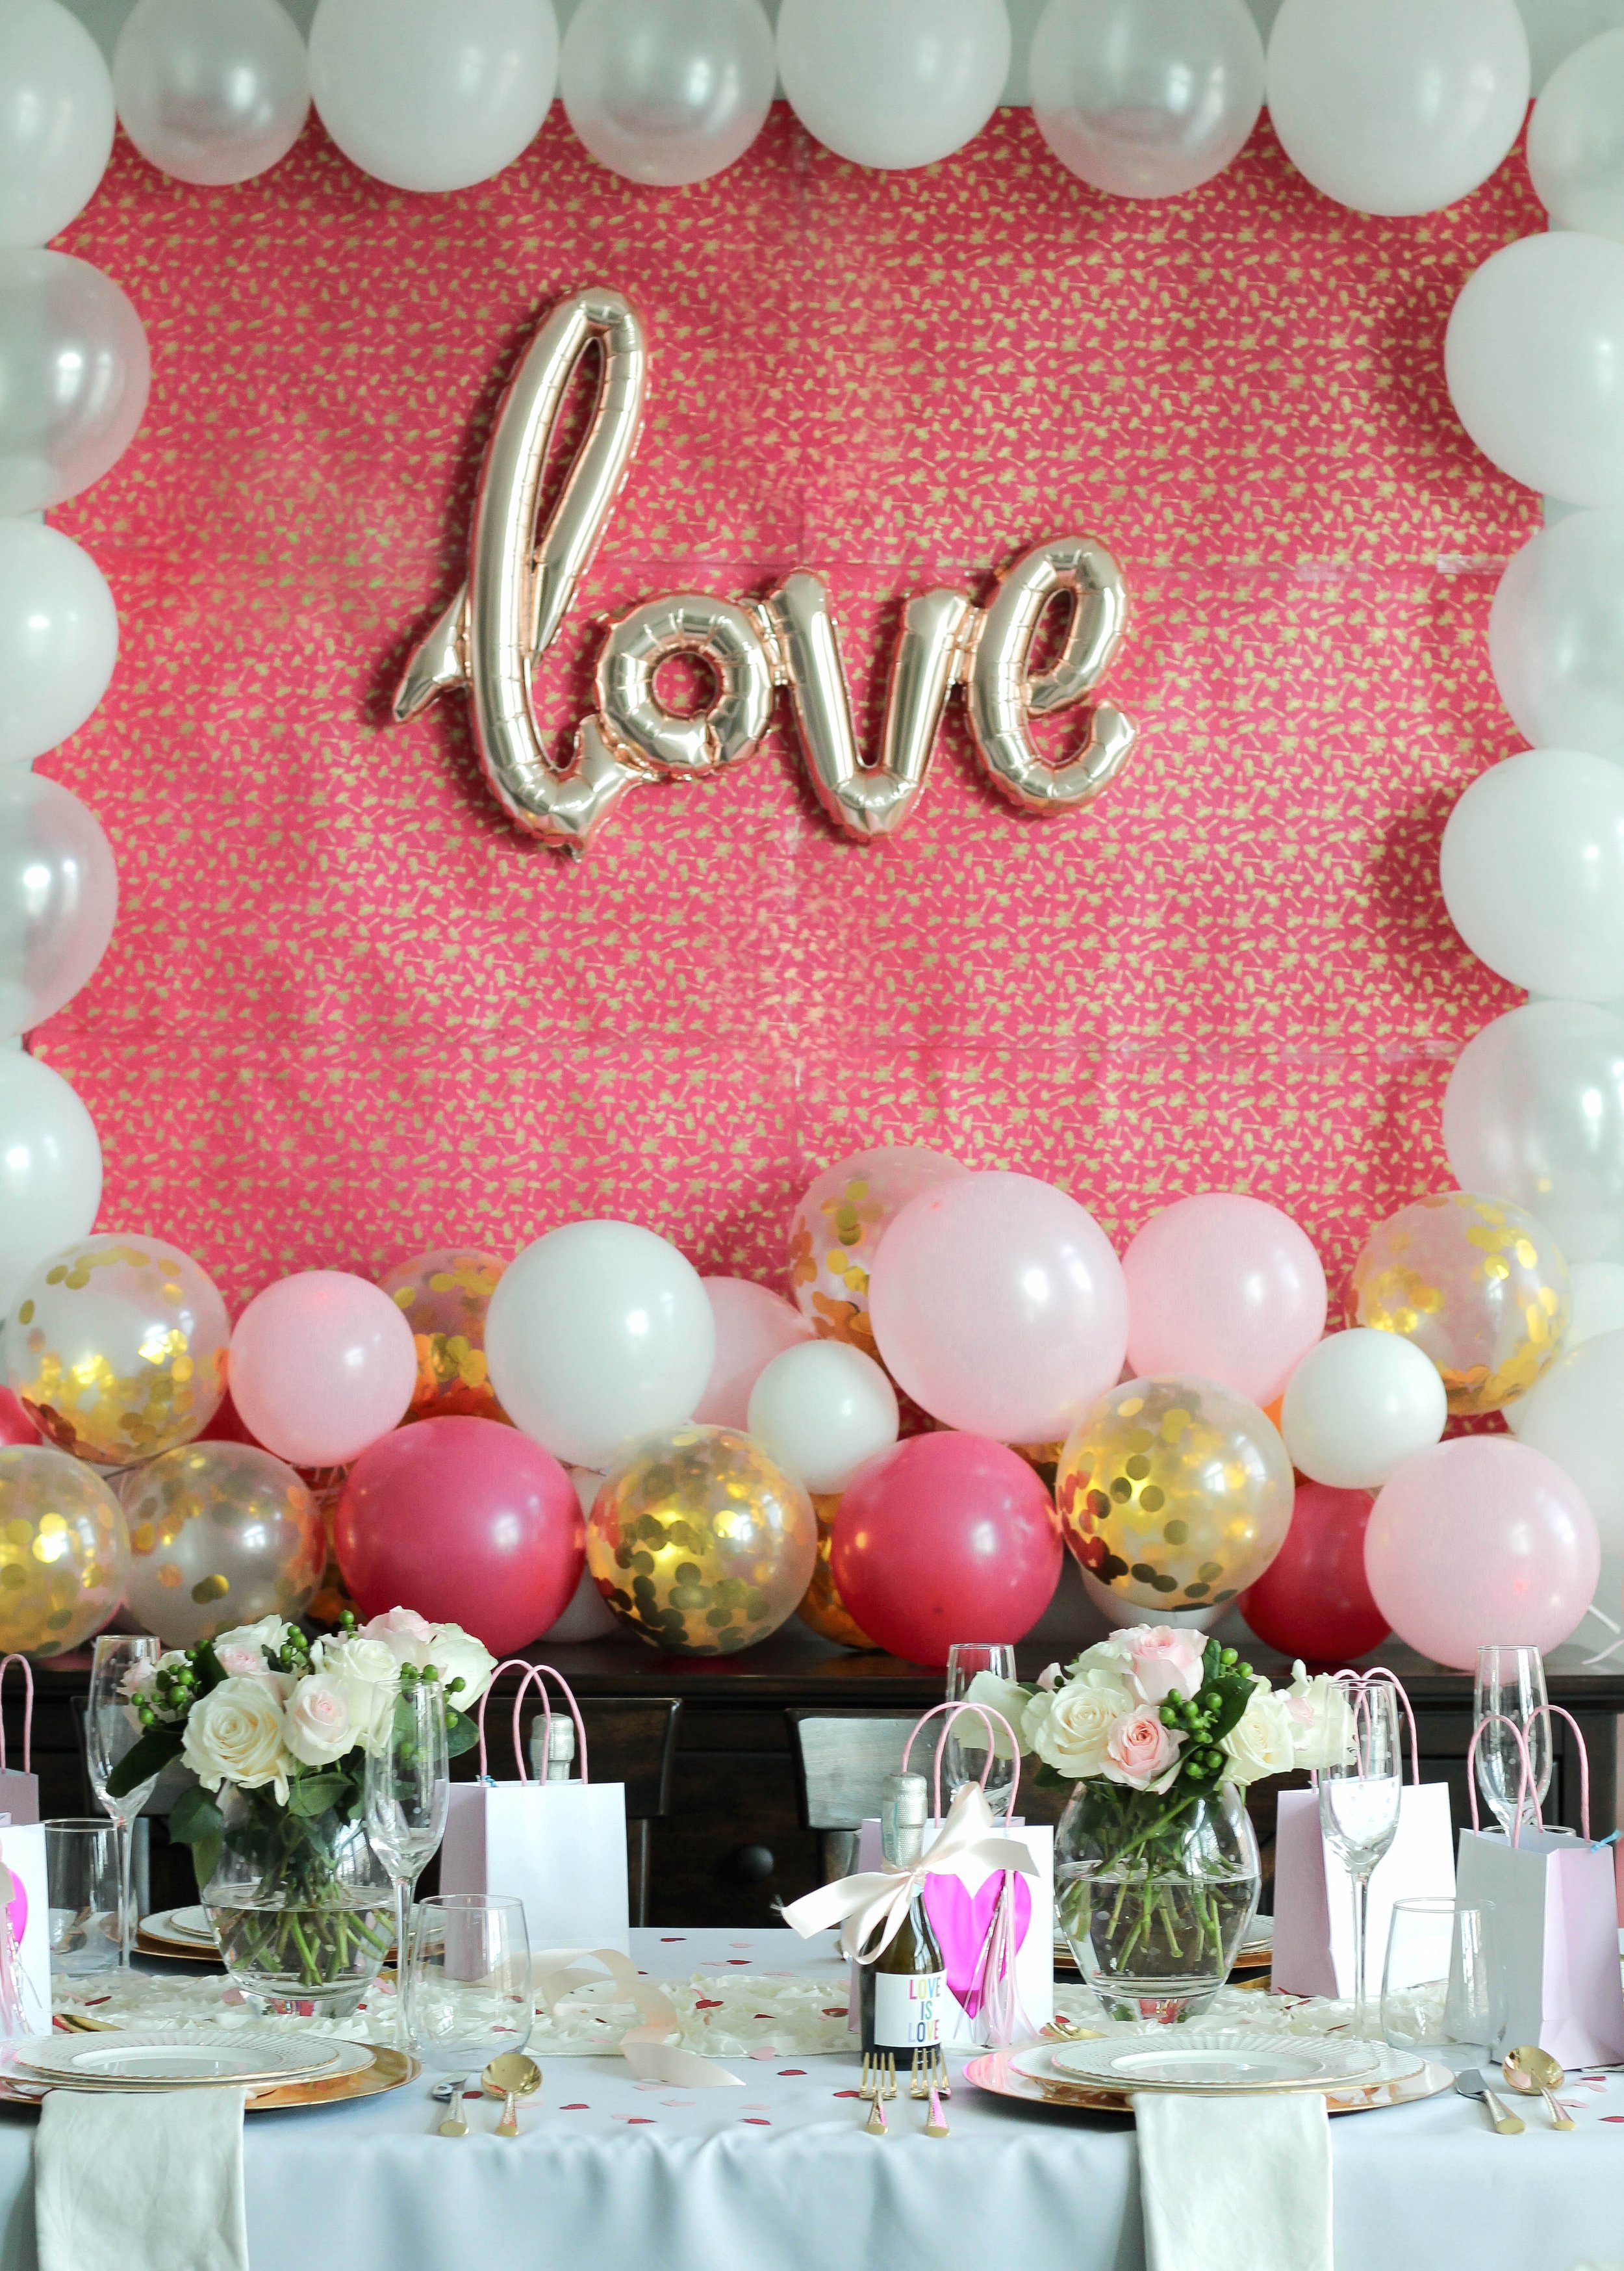 How to Throw a Galentine's Day Brunch Party